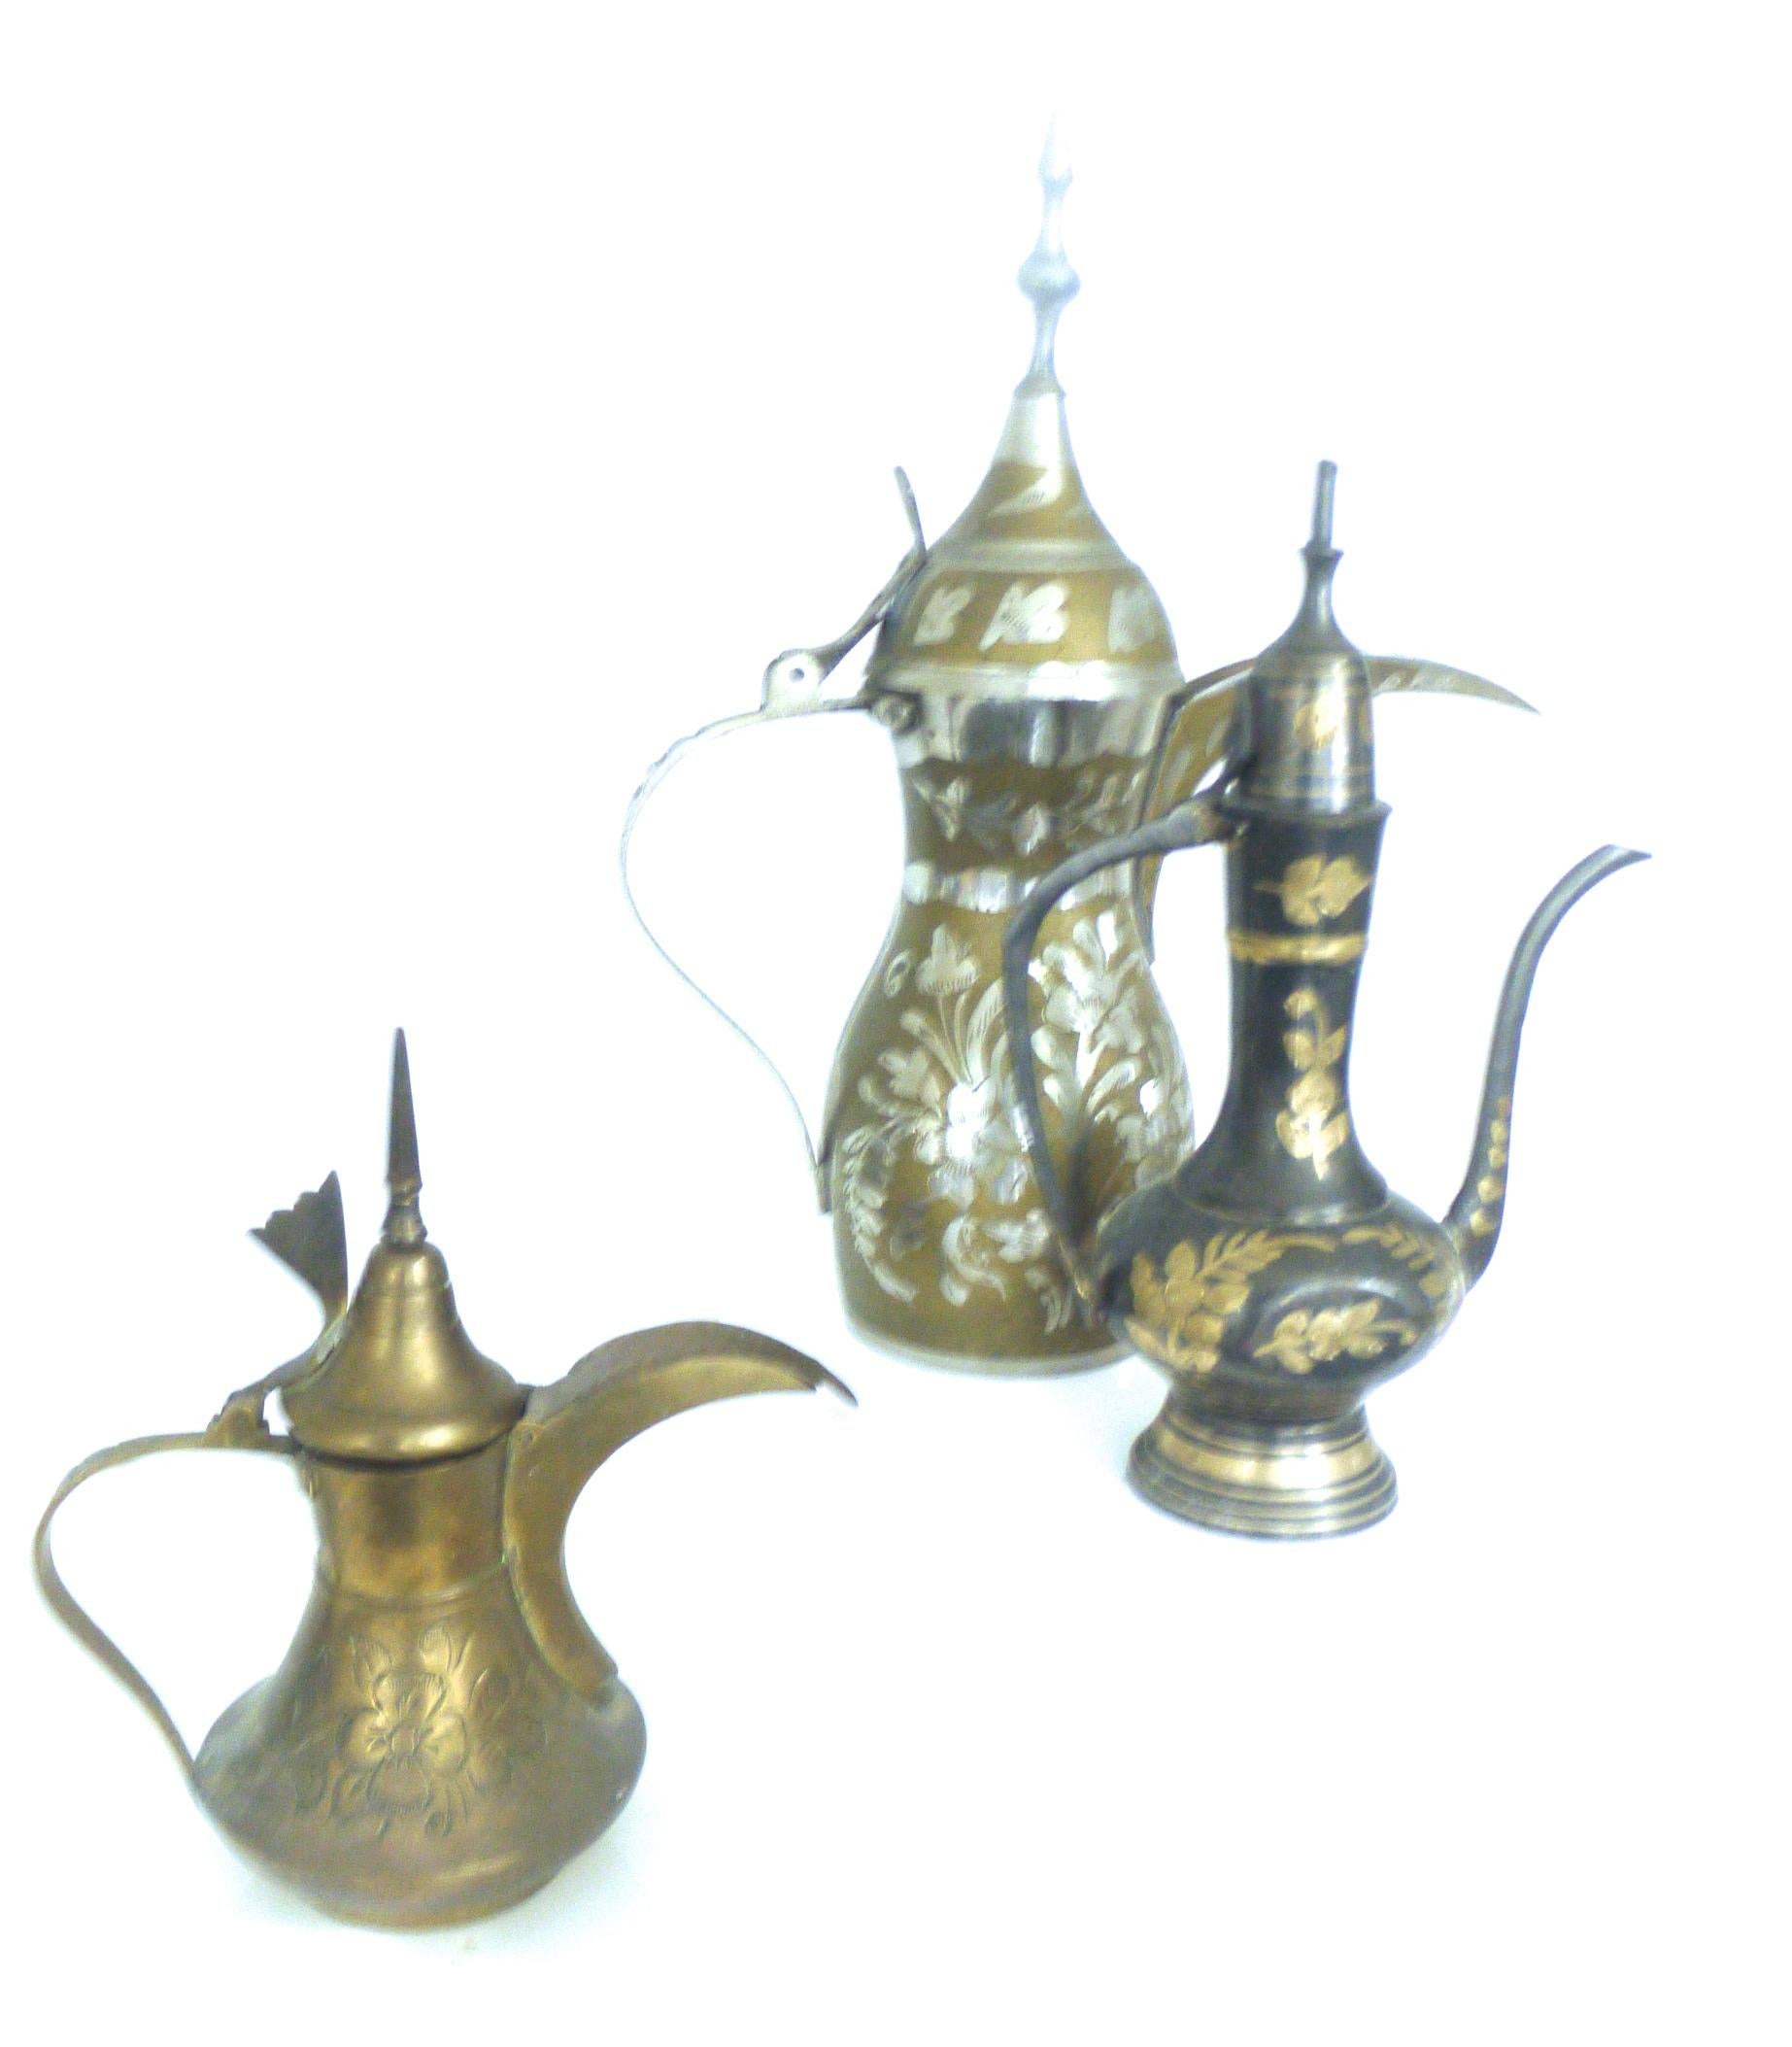 Vintage collection of decorative three Islamic Dallah coffee pots from Morocco
We have several small collections - offers for additional collections welcomed.

Size: Large Middle Eastern brass coffee pot
Height 29 cms, diameter at widest